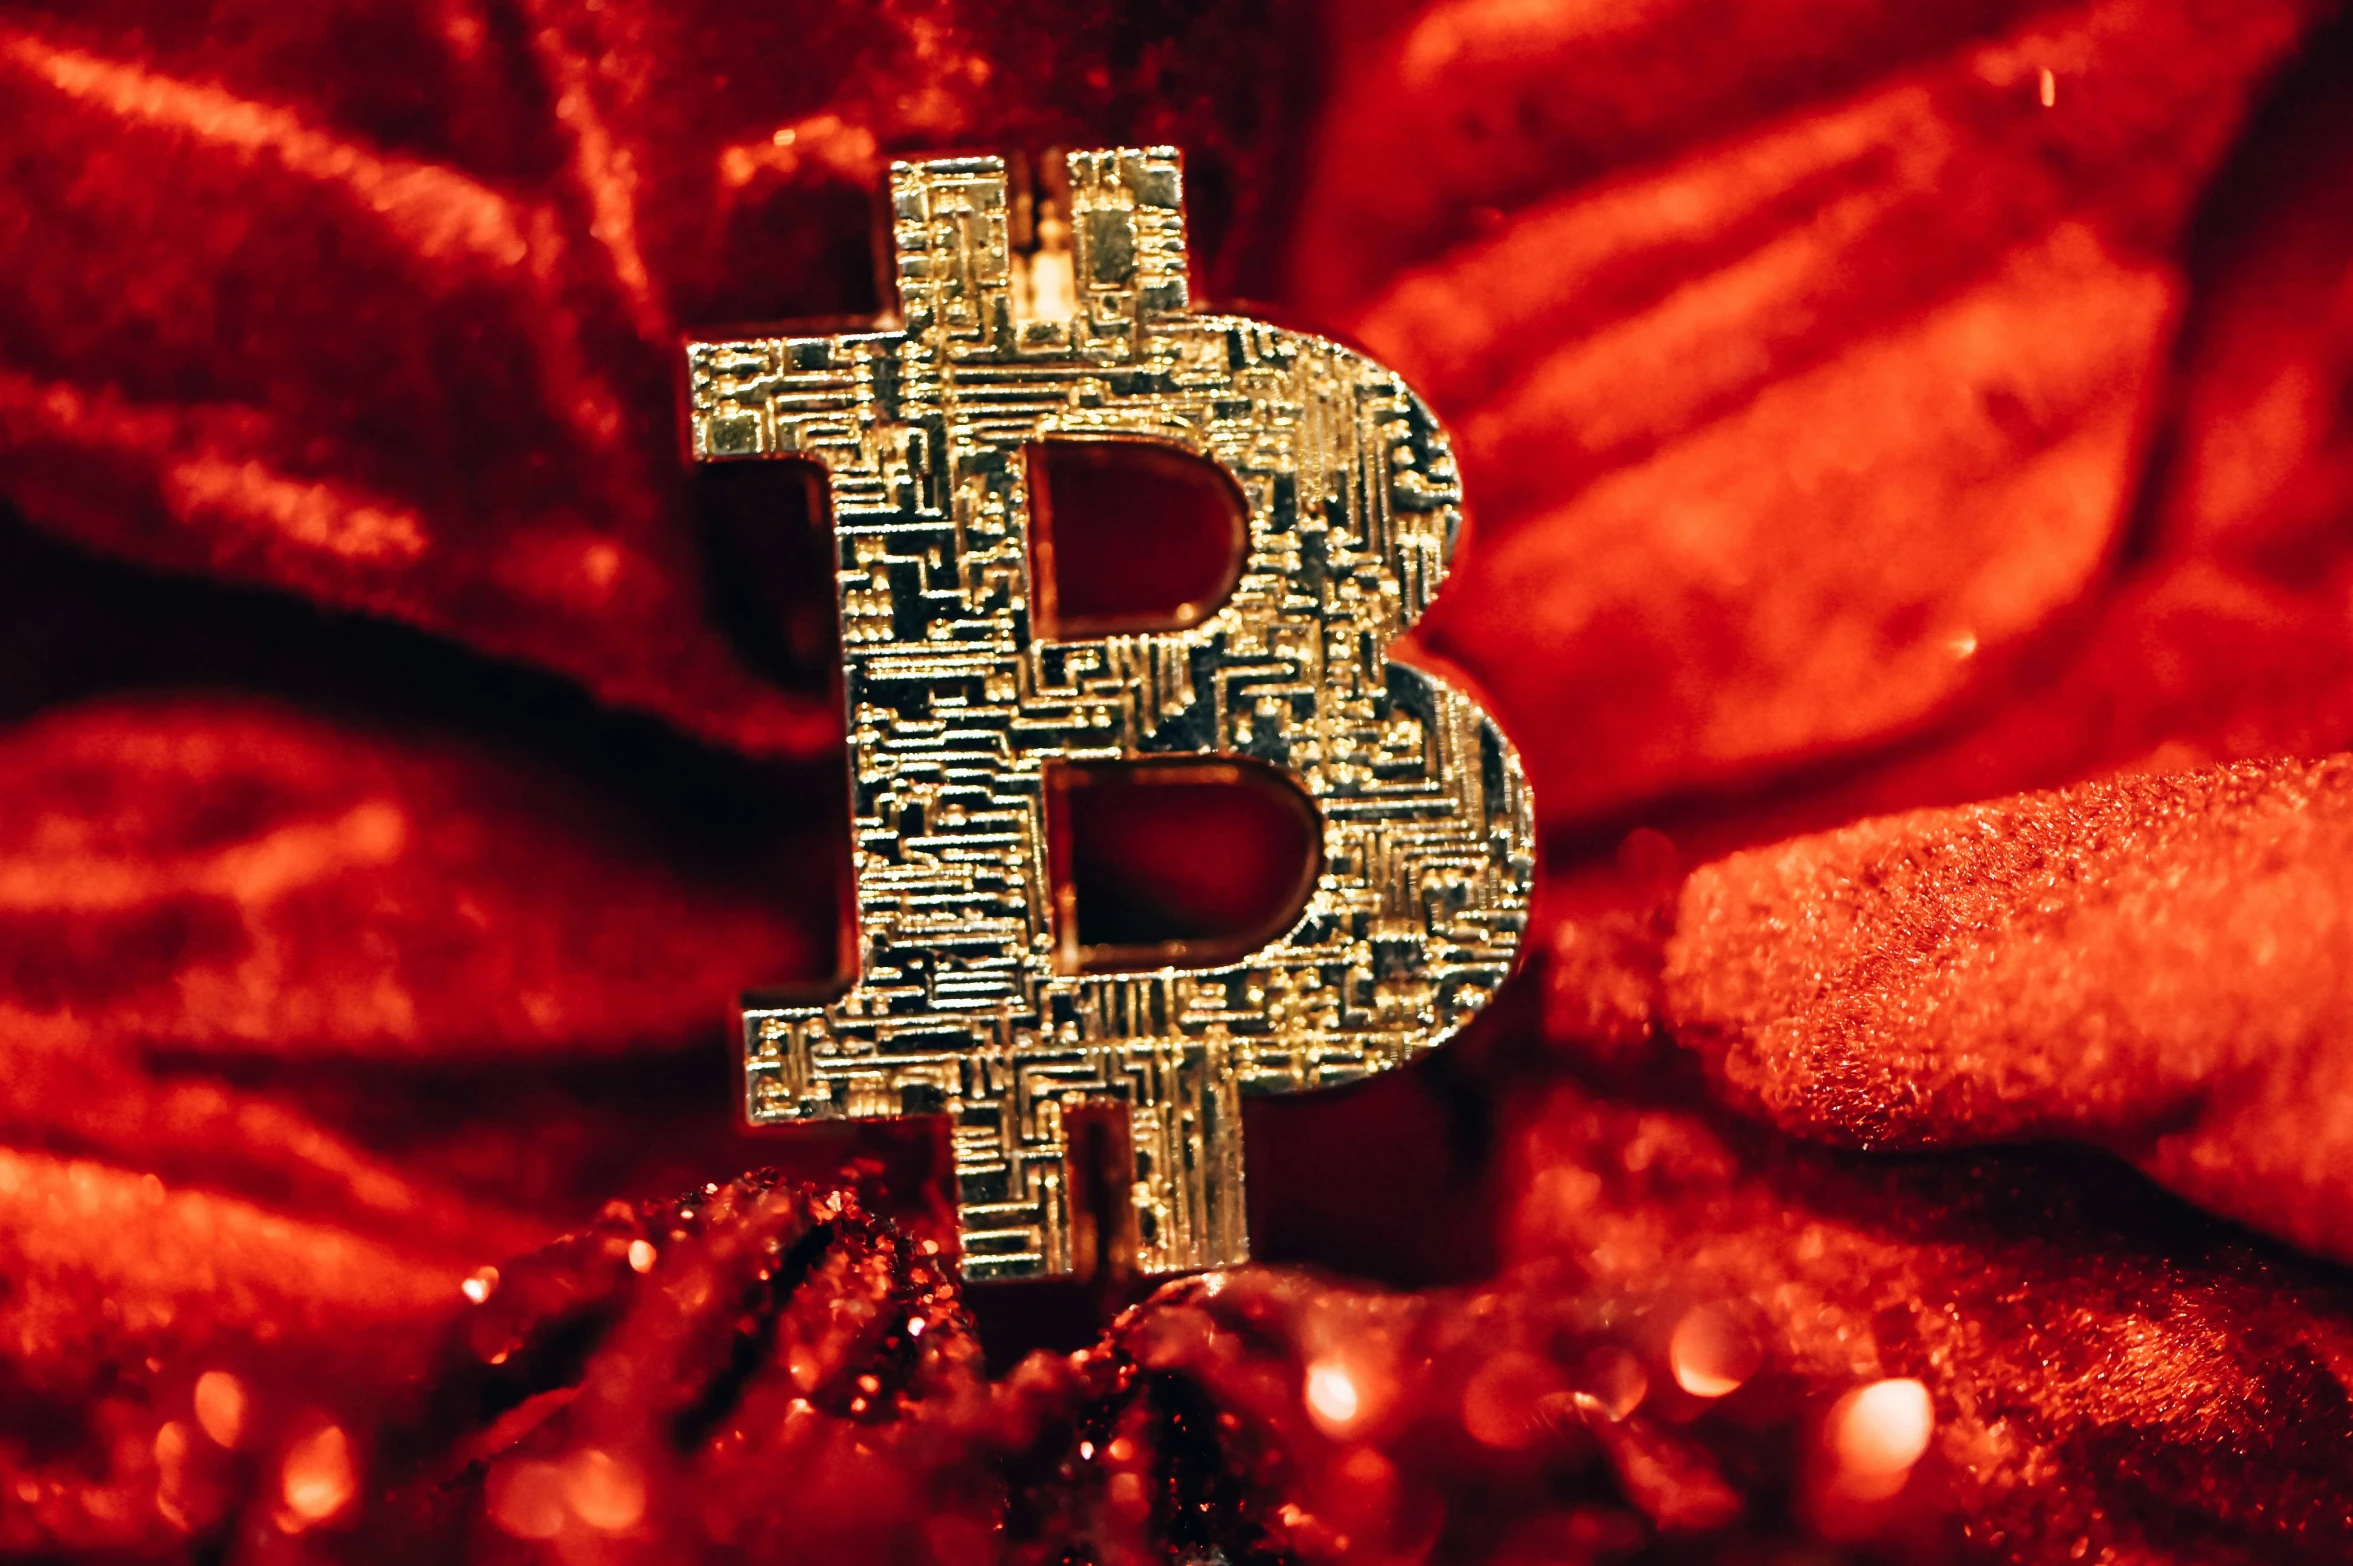 a golden bit coin is standing on a red background